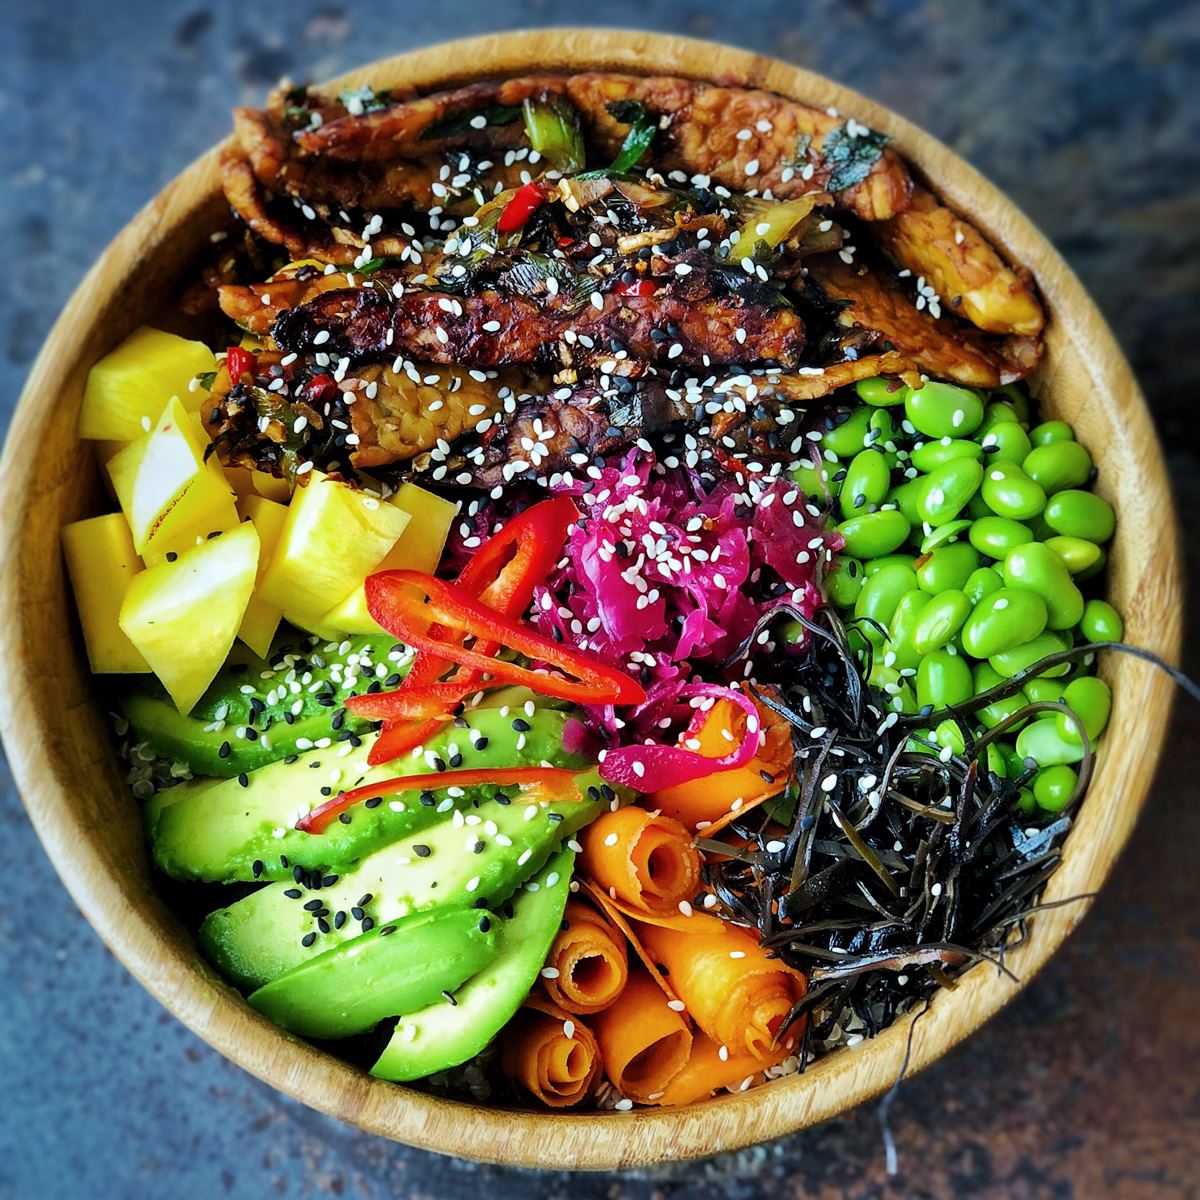 What Is In A Poke Bowl